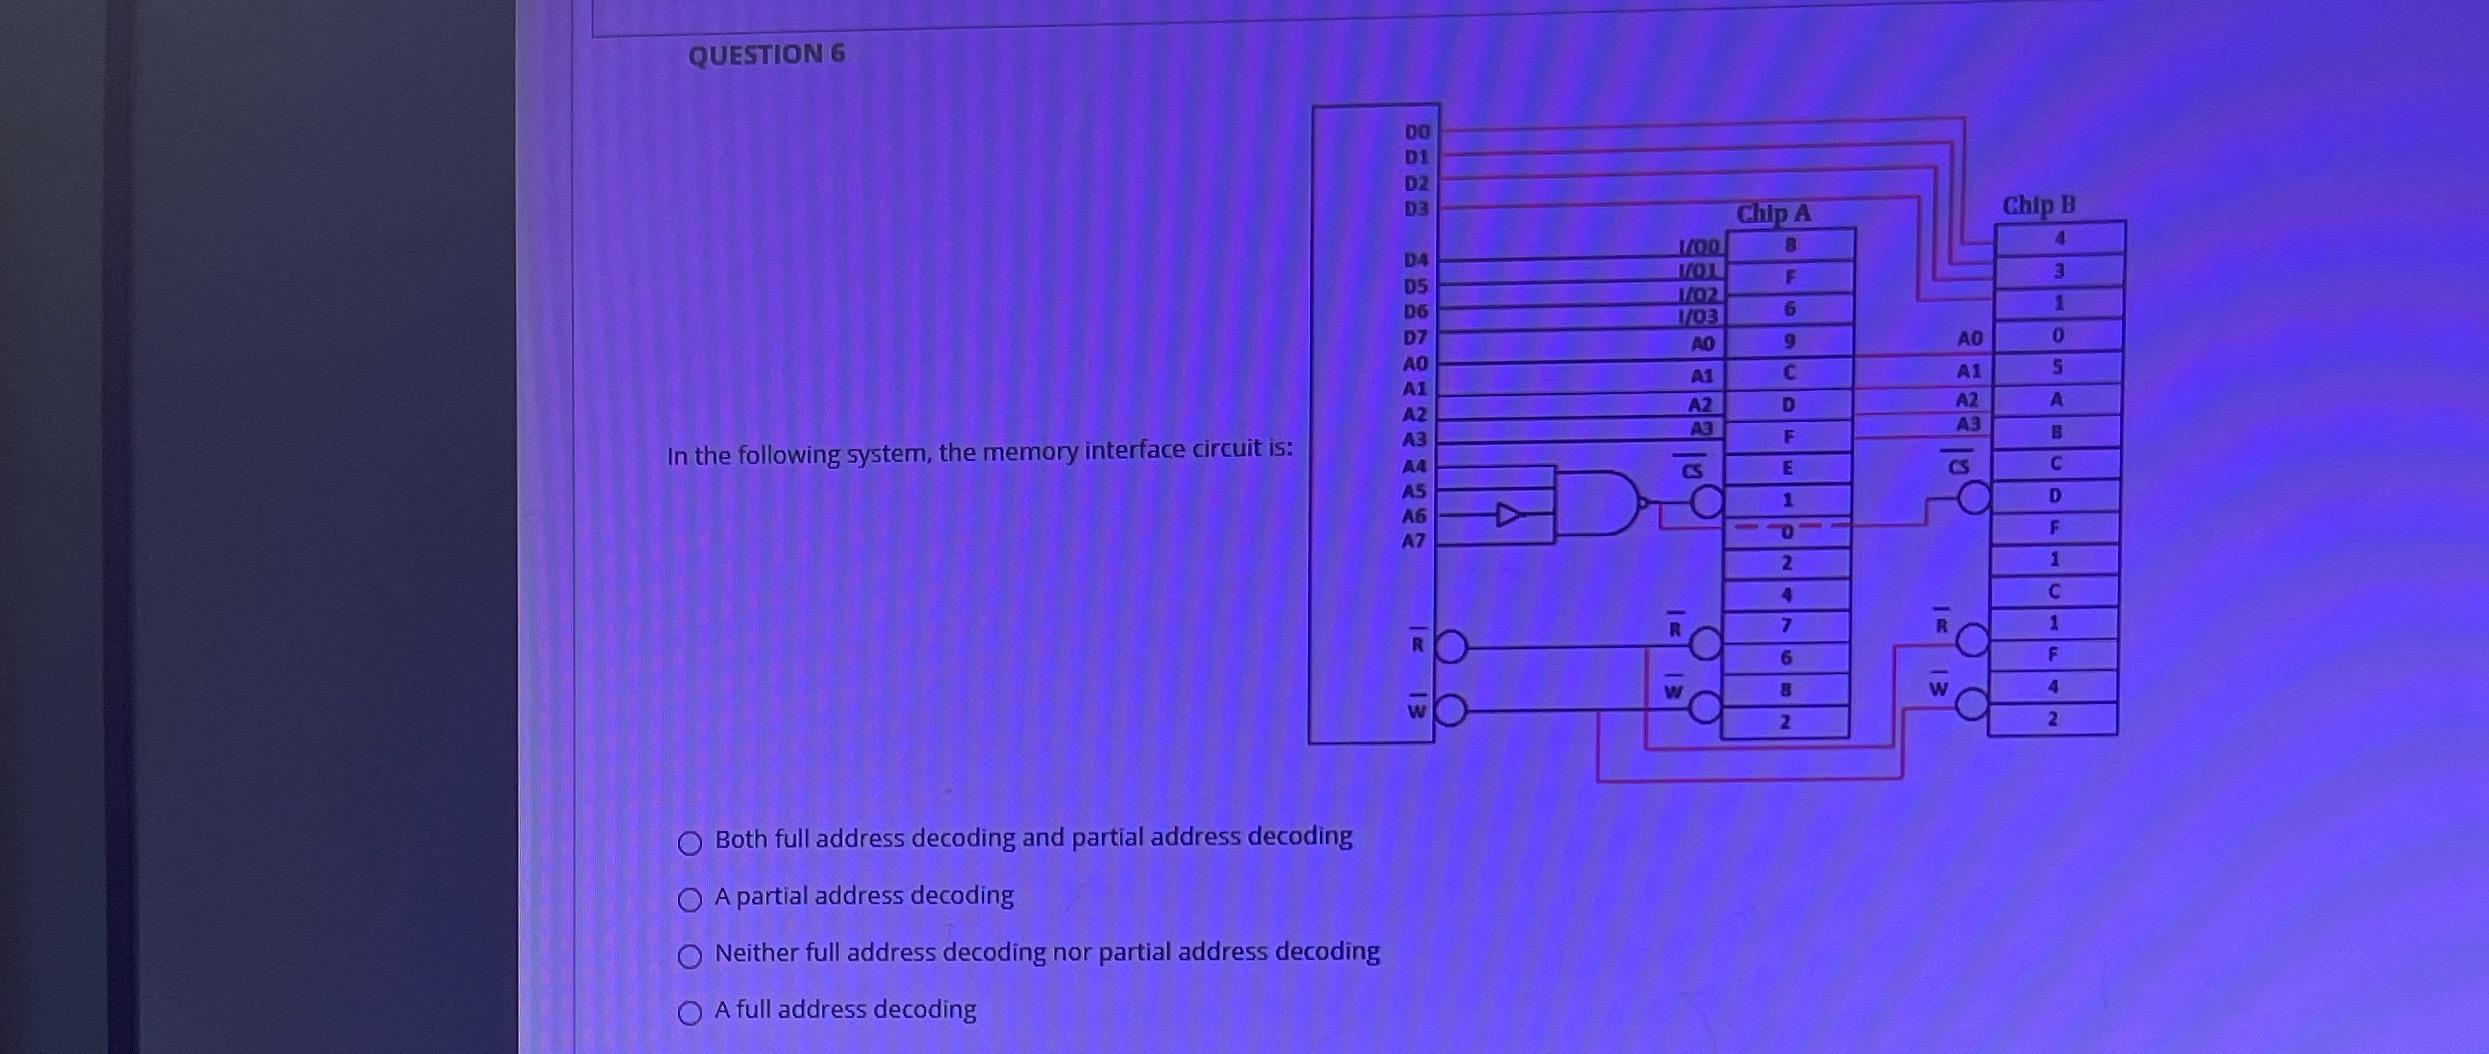 QUESTION 6 In the following system, the memory interface circuit is: Both full address decoding and partial